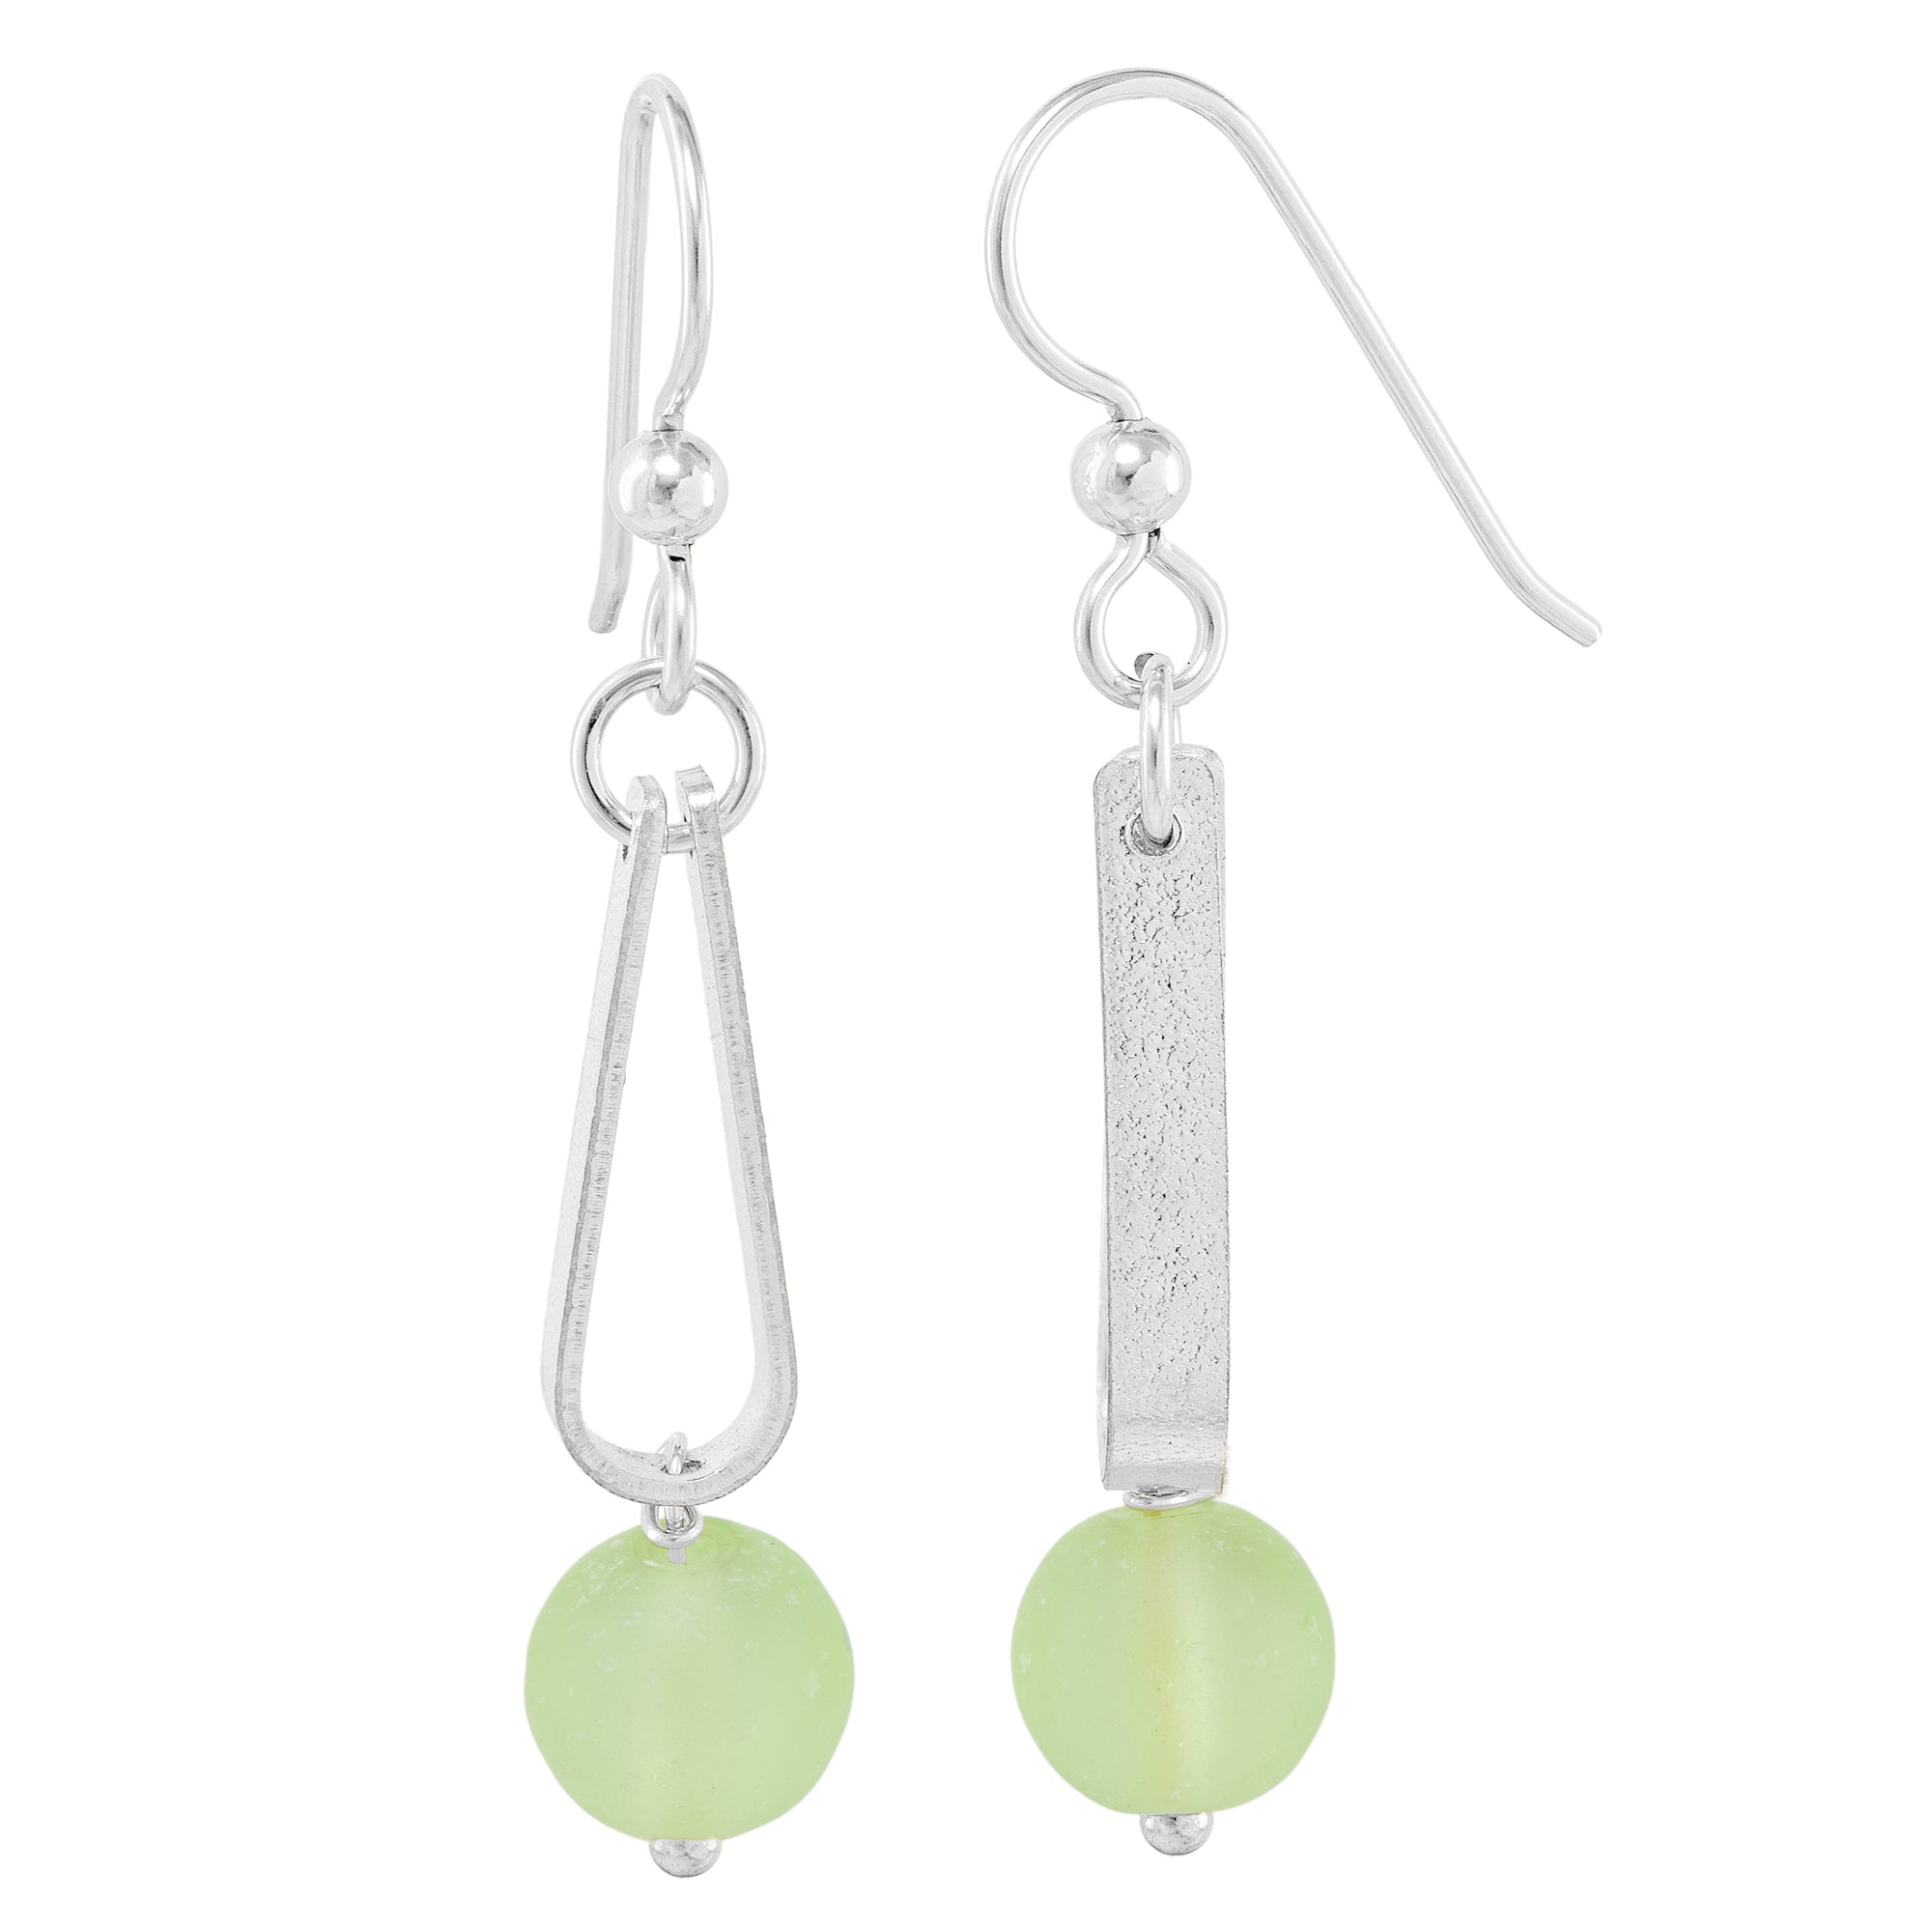 Light Pastel Sage Green Round Recycled Glass Ball and Sterling Silver Teardrop Shaped Dangle Earrings